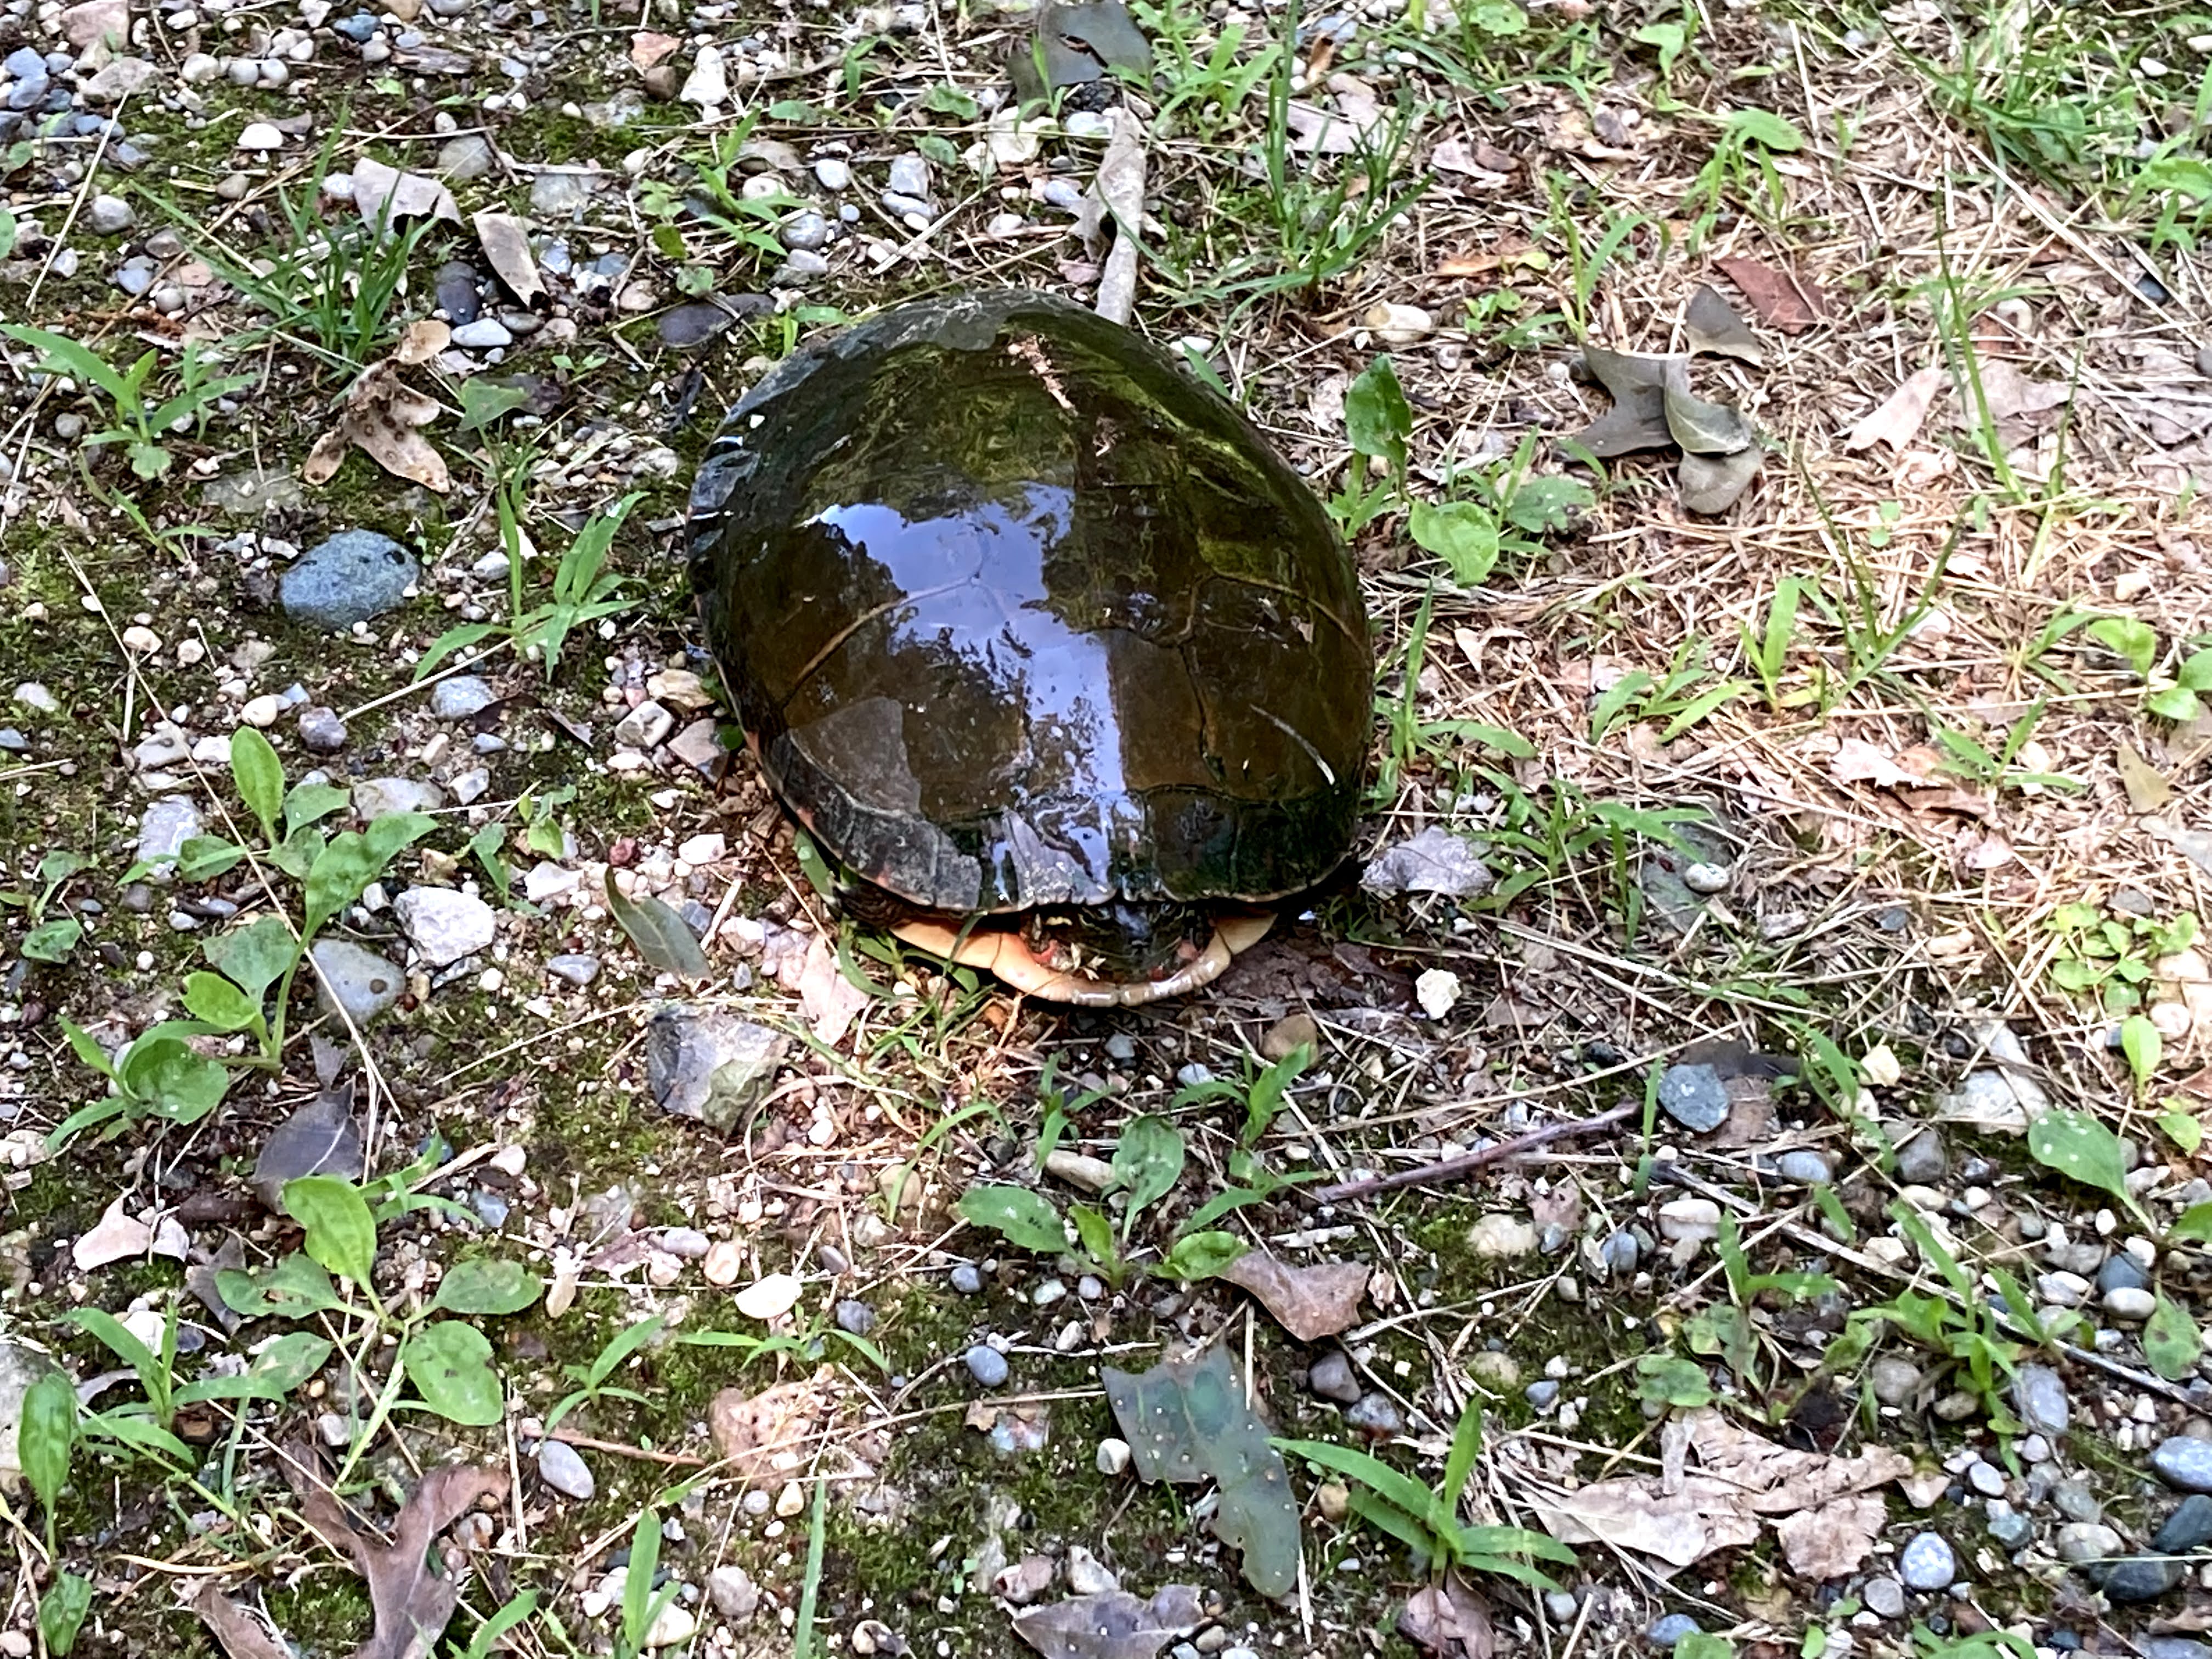 a deep green turtle on the ground